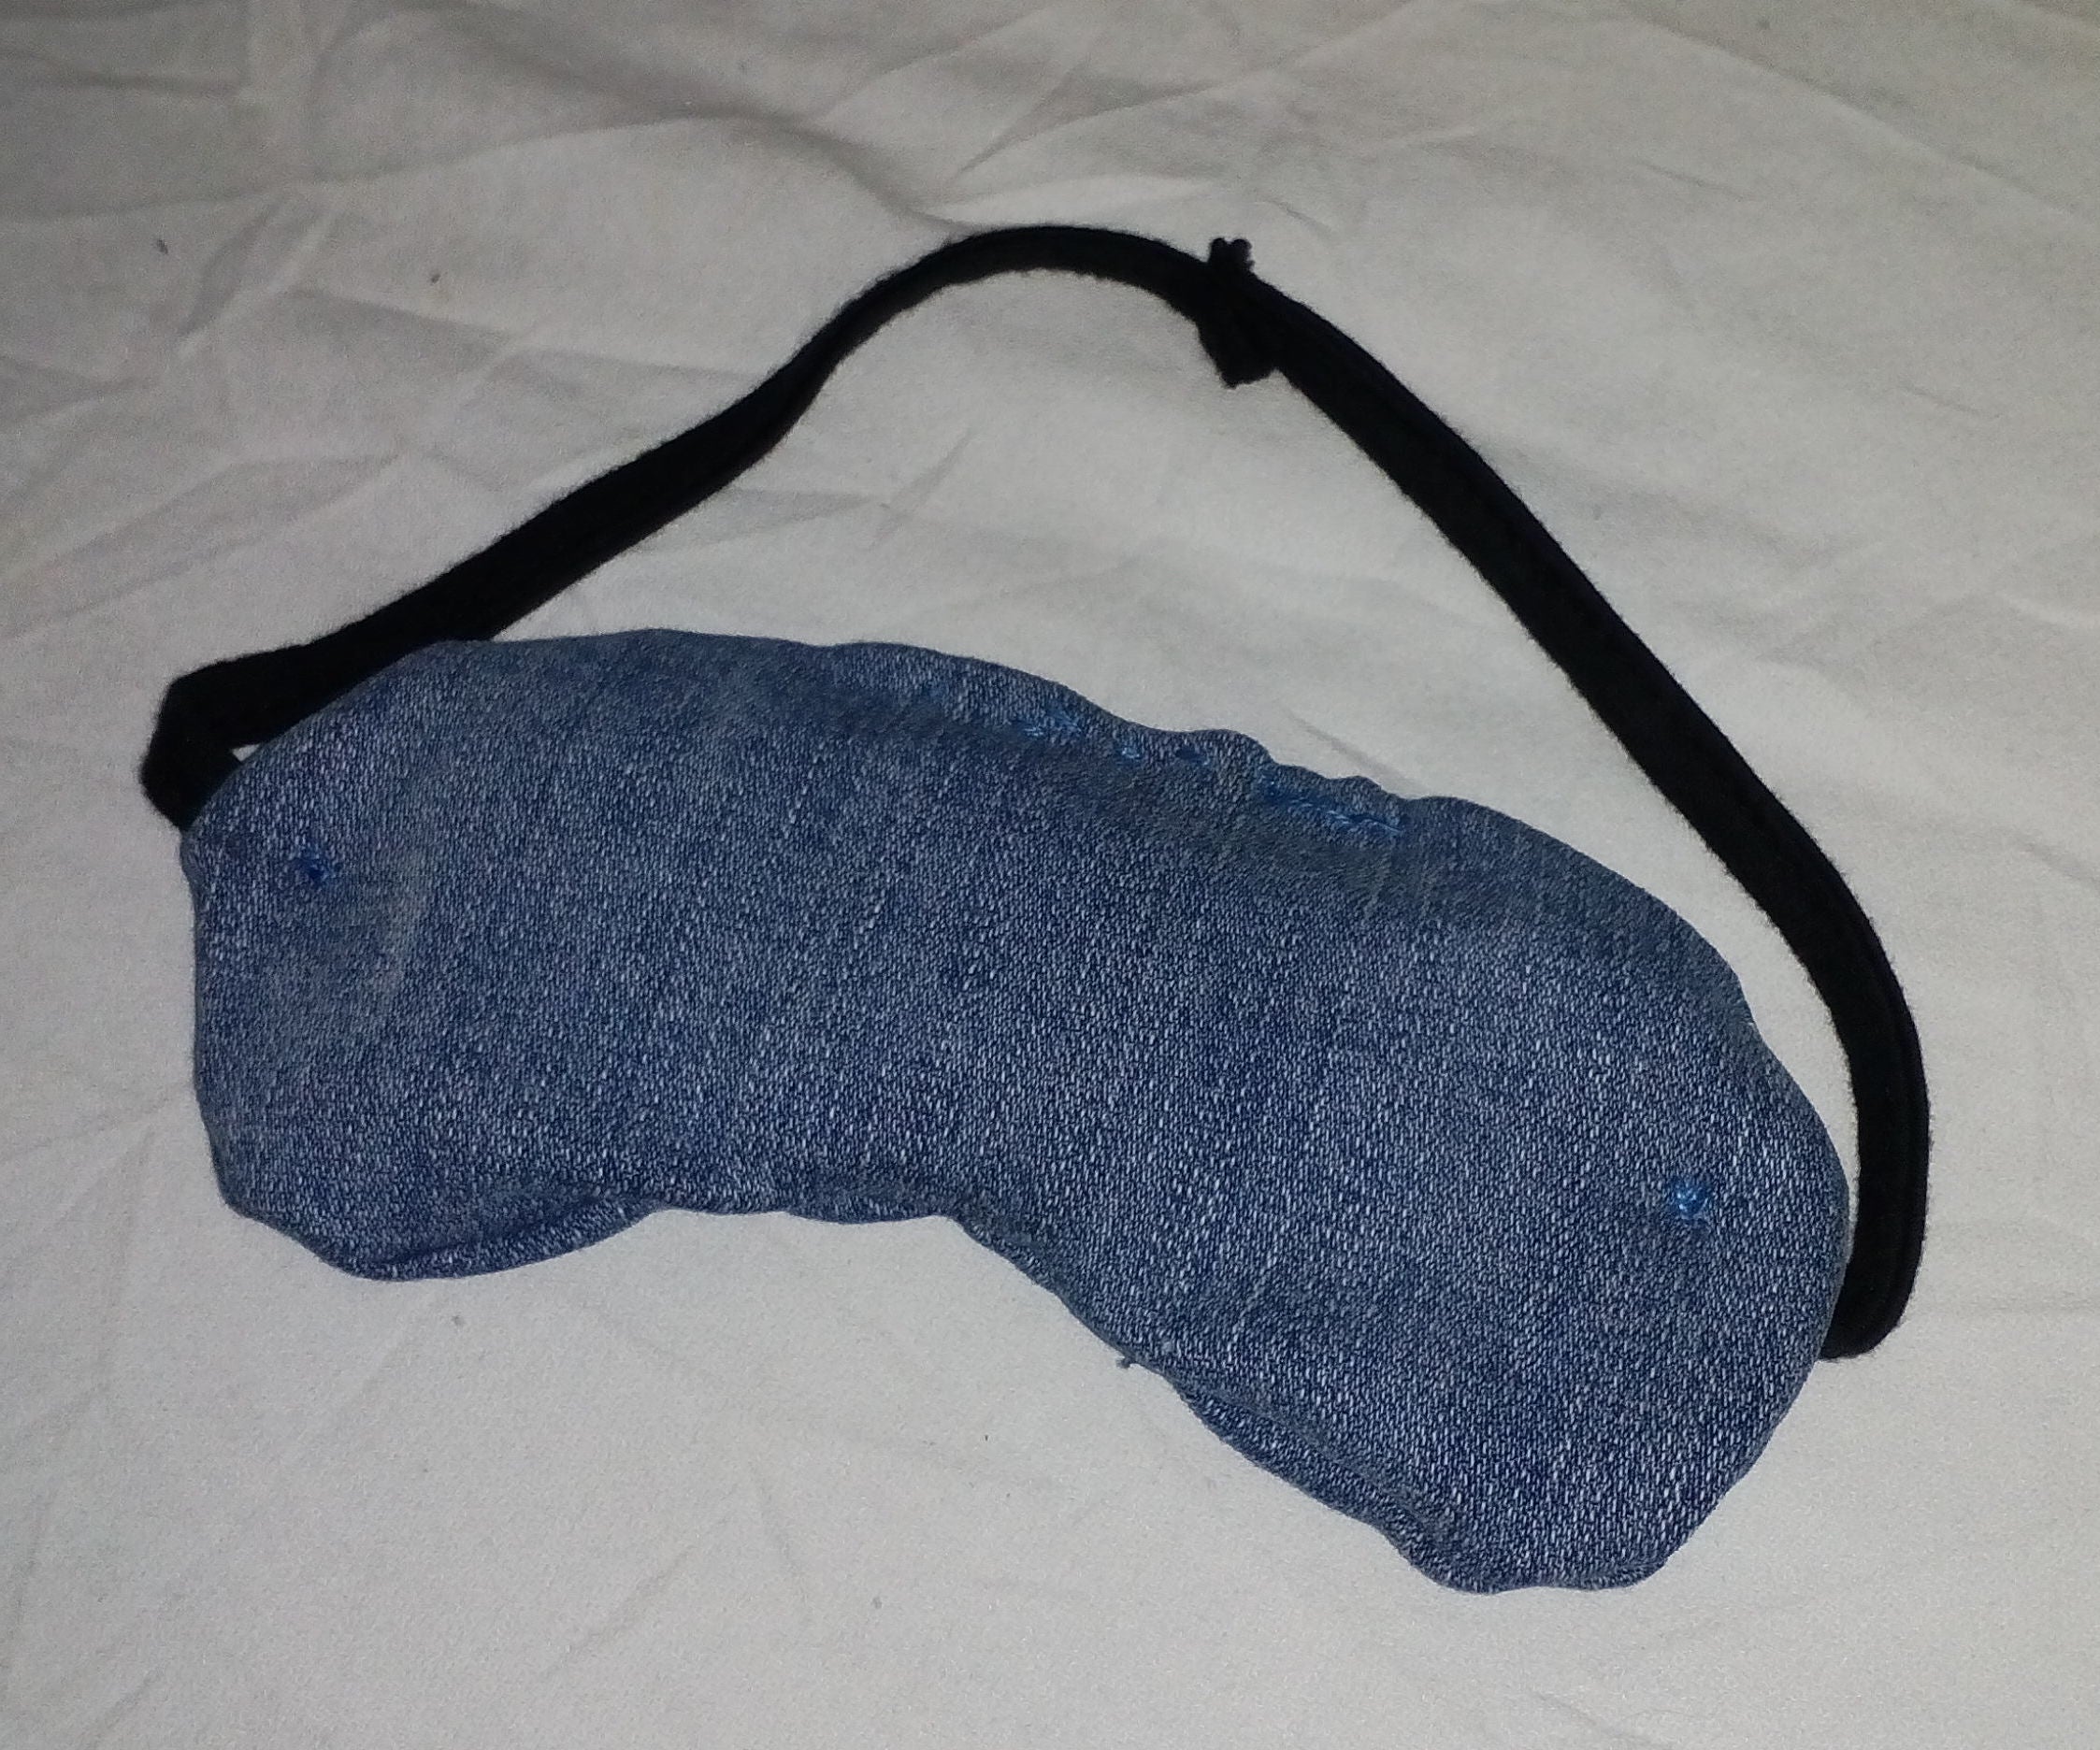 How to Make Sleeping Eye Mask From Old Jeans